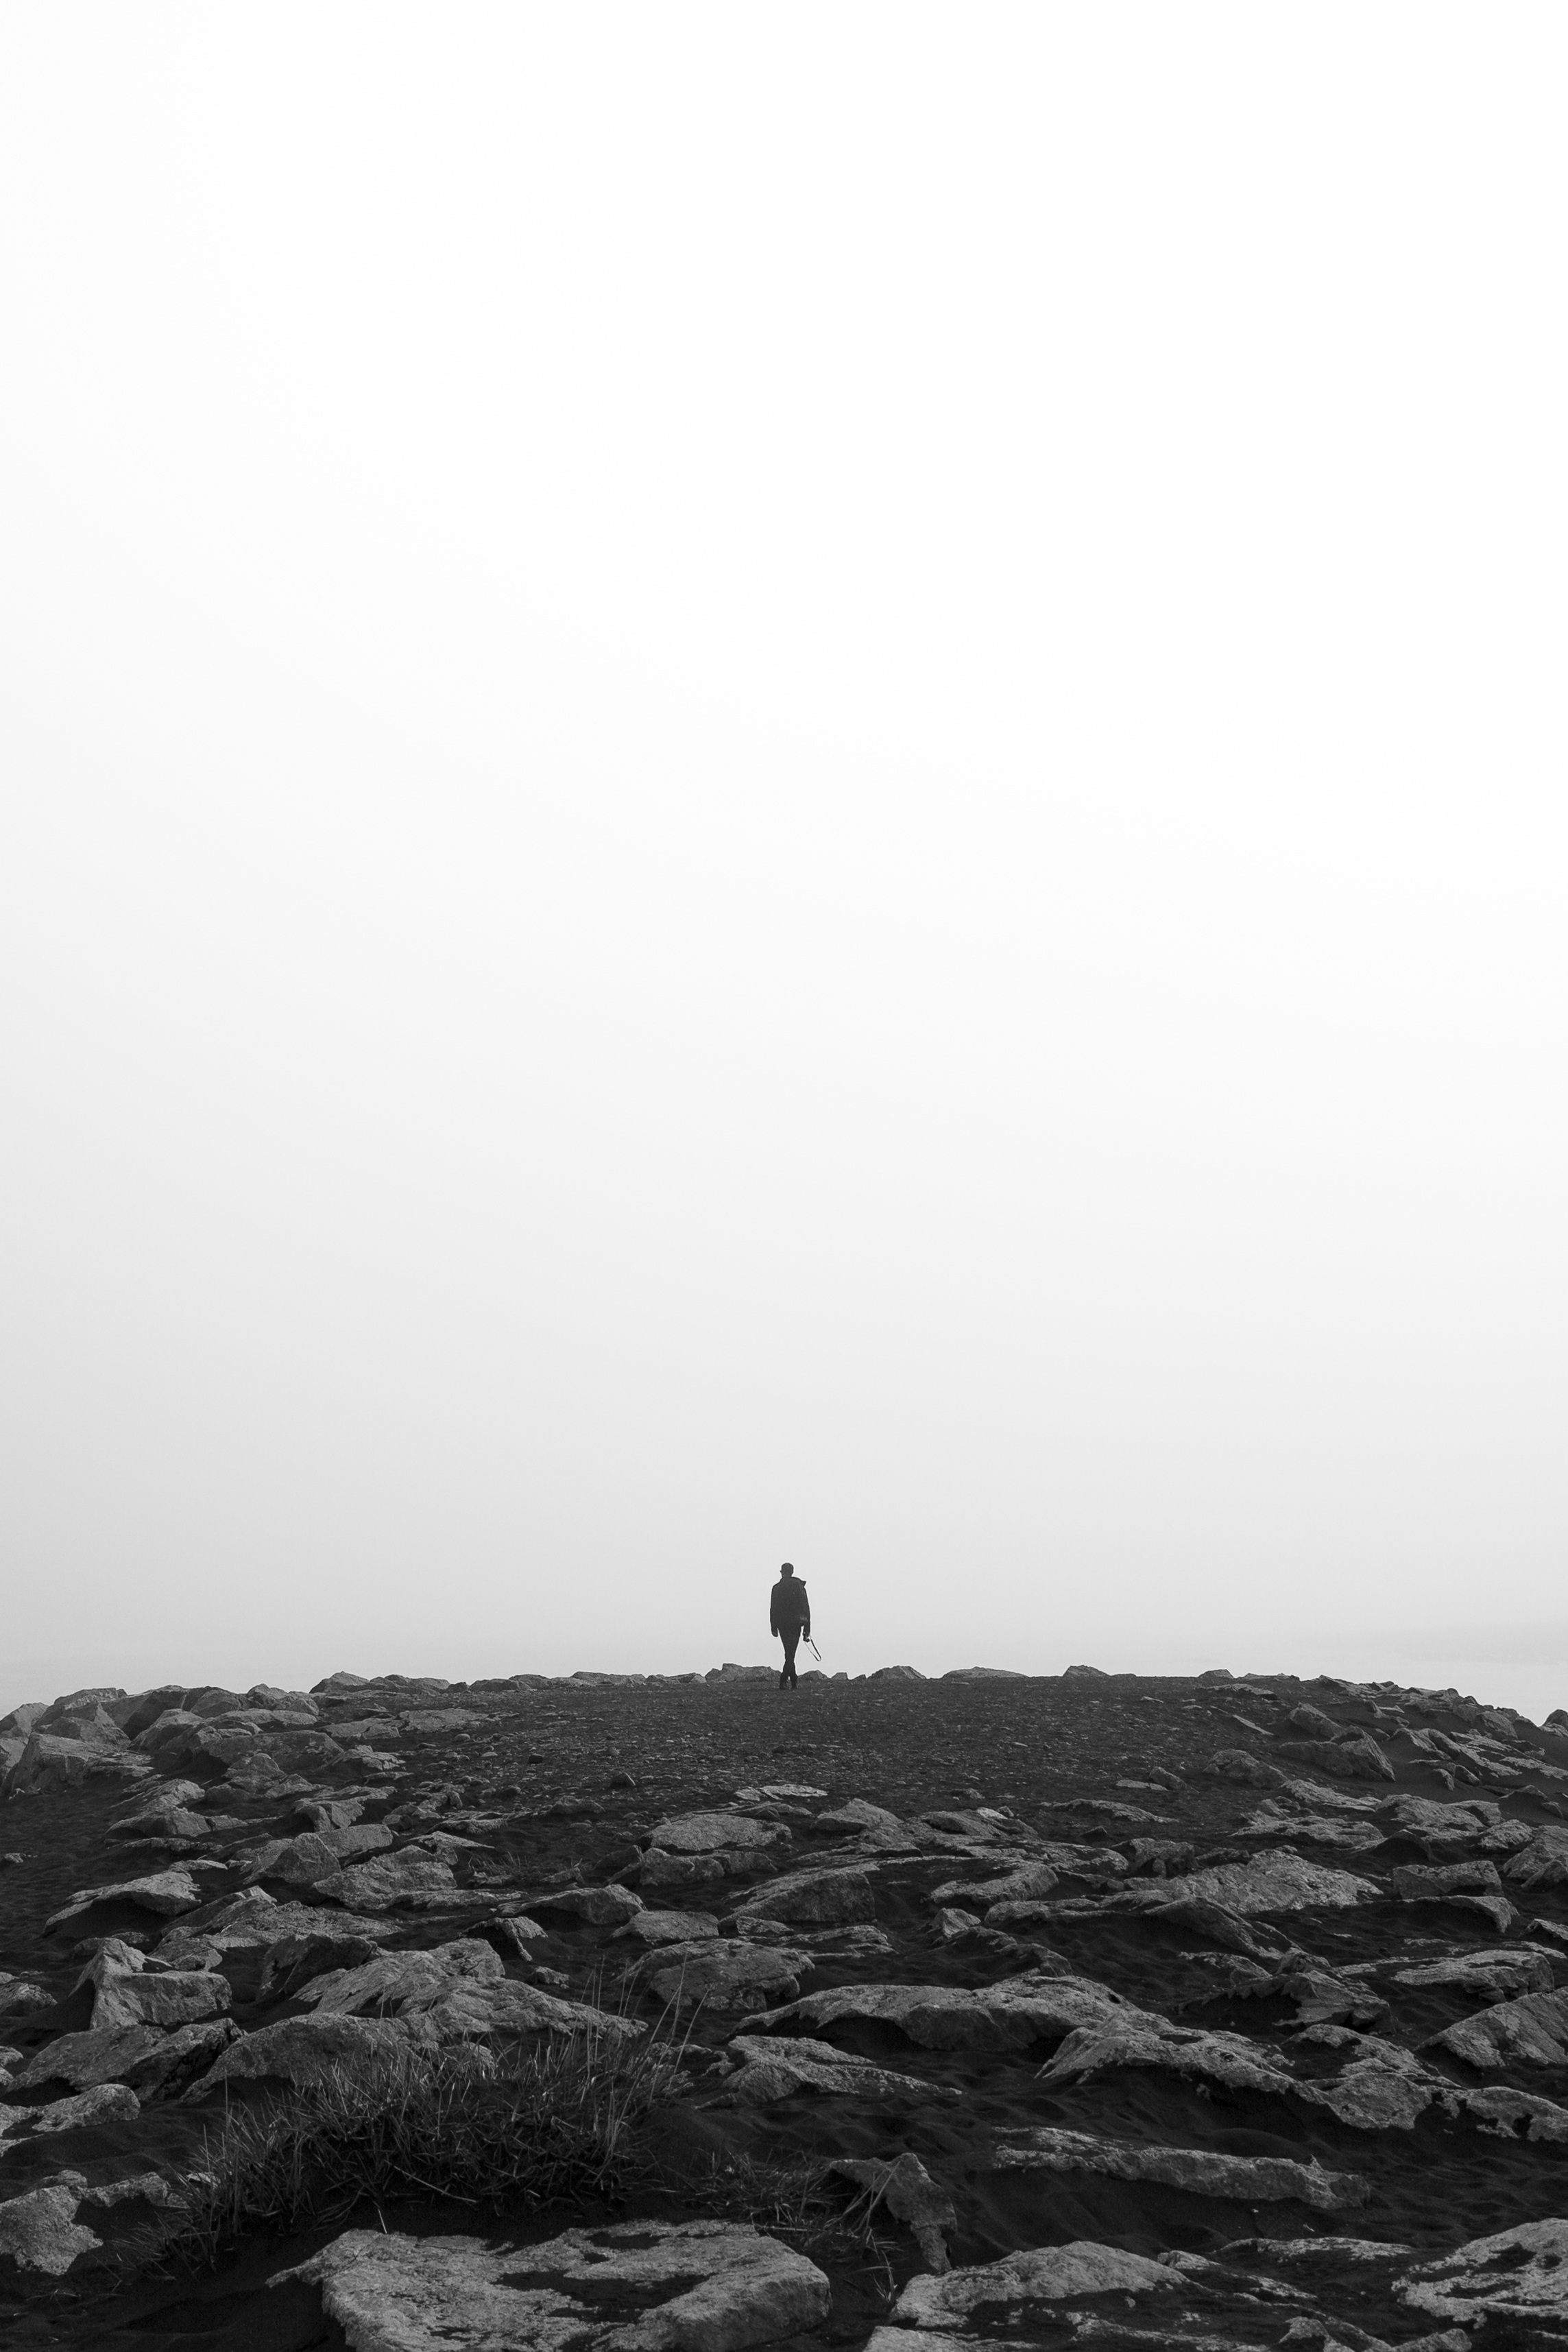 bw, minimalism, loneliness, stones, horizon, privacy, seclusion, chb iphone wallpaper